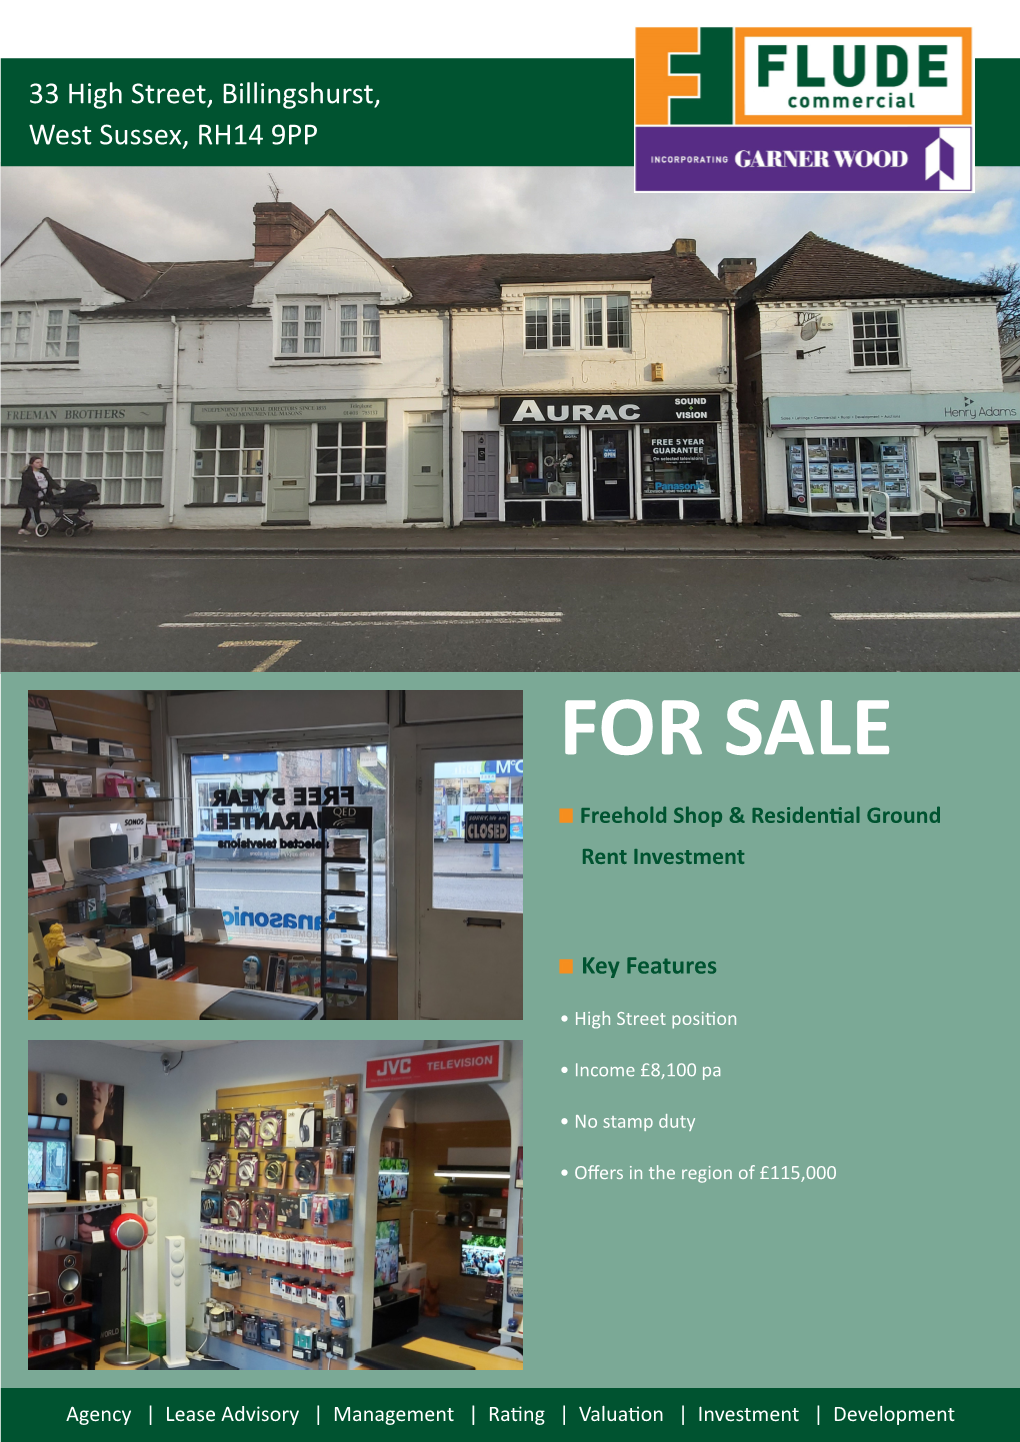 FOR SALE Freehold Shop & Residential Ground Rent Investment